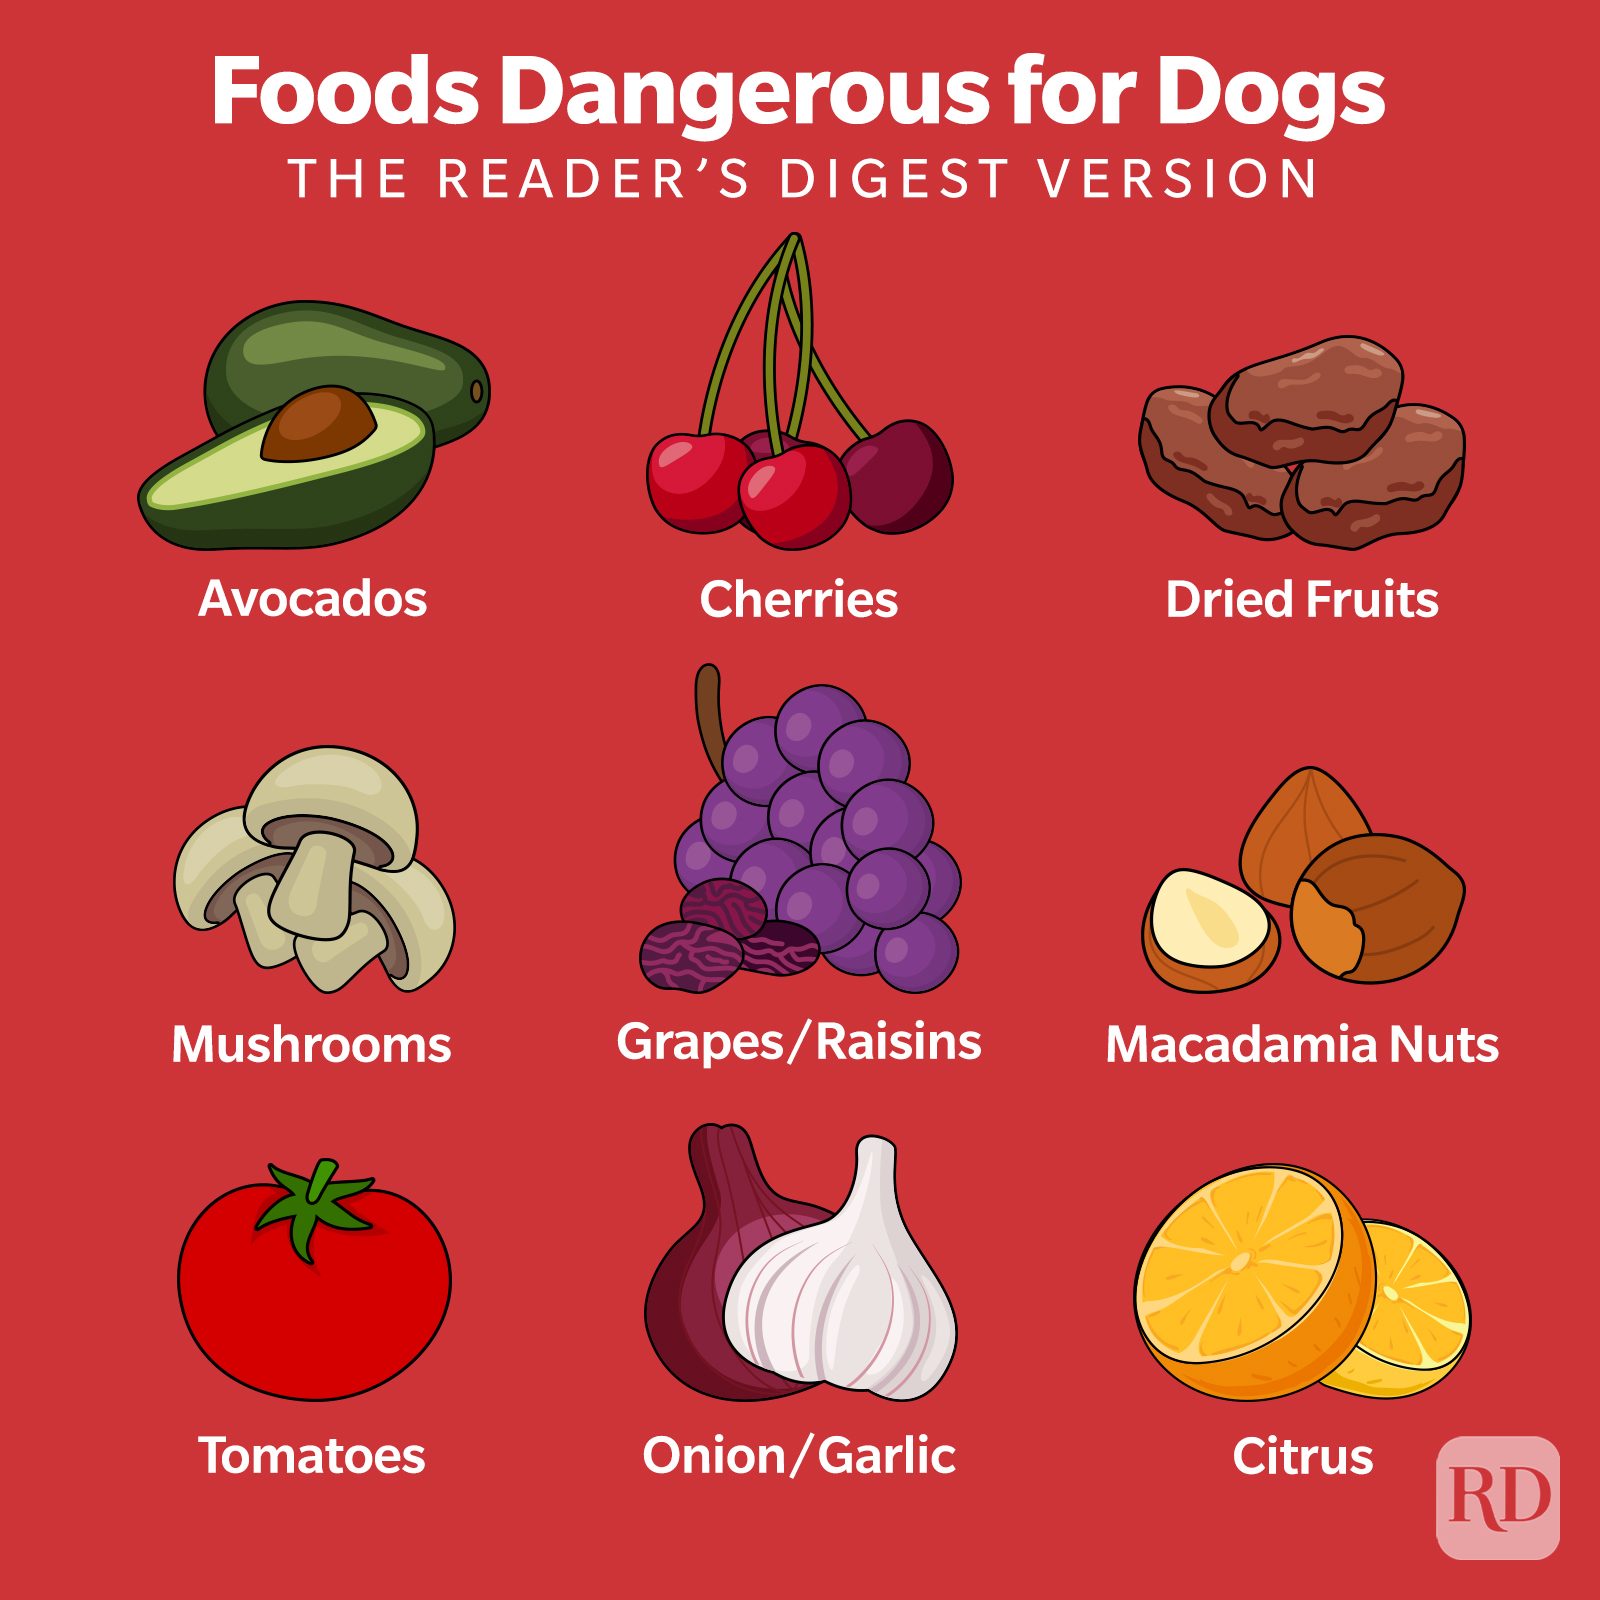 https://www.rd.com/wp-content/uploads/2018/09/20230822_Foods-dangerous-for-dogs_Infographic.jpg?fit=700%2C700